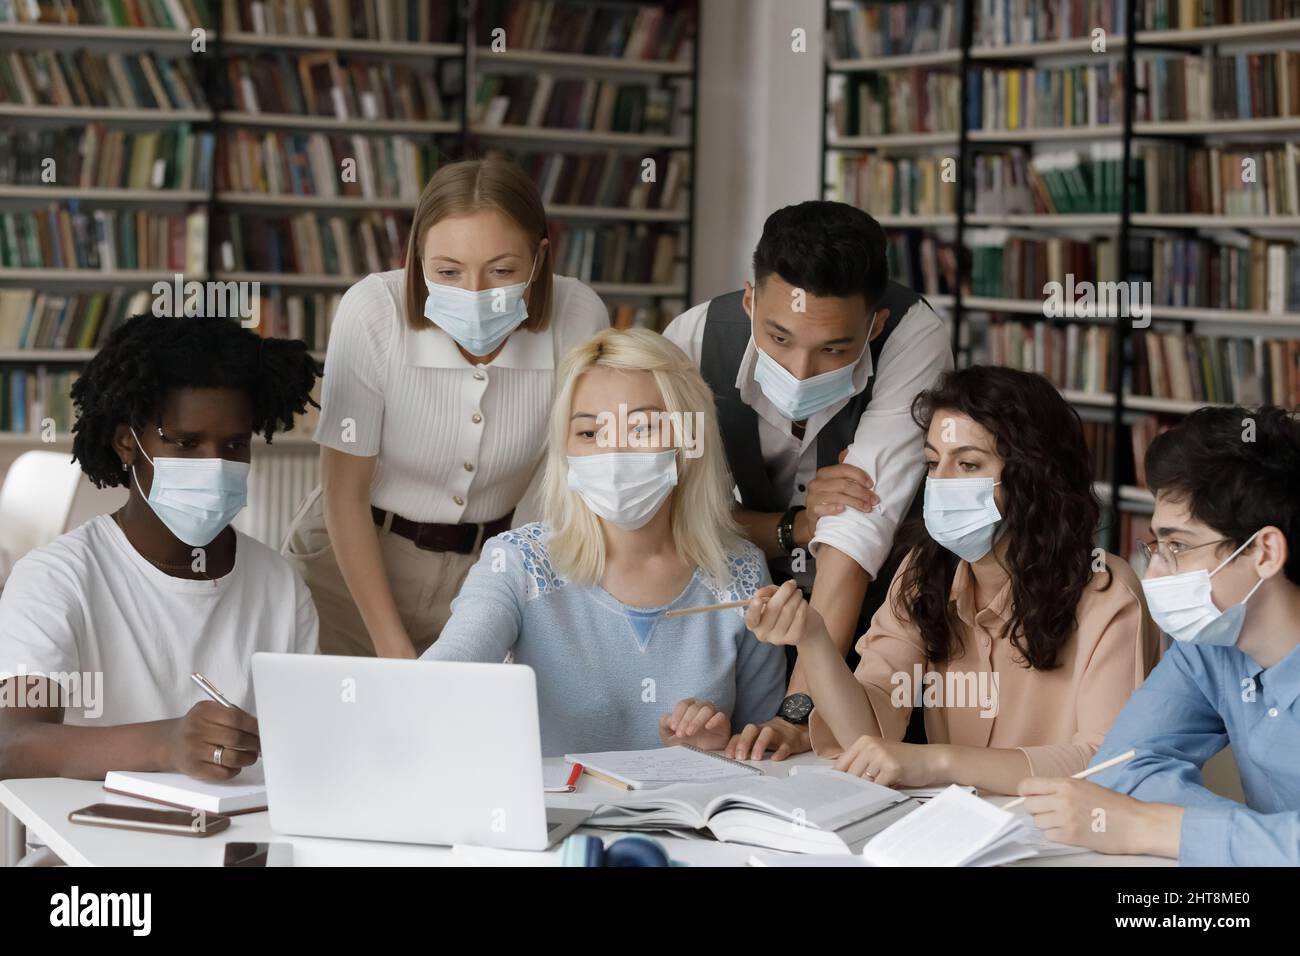 Group of happy multiethnic students in facemasks studying in library. Stock Photo